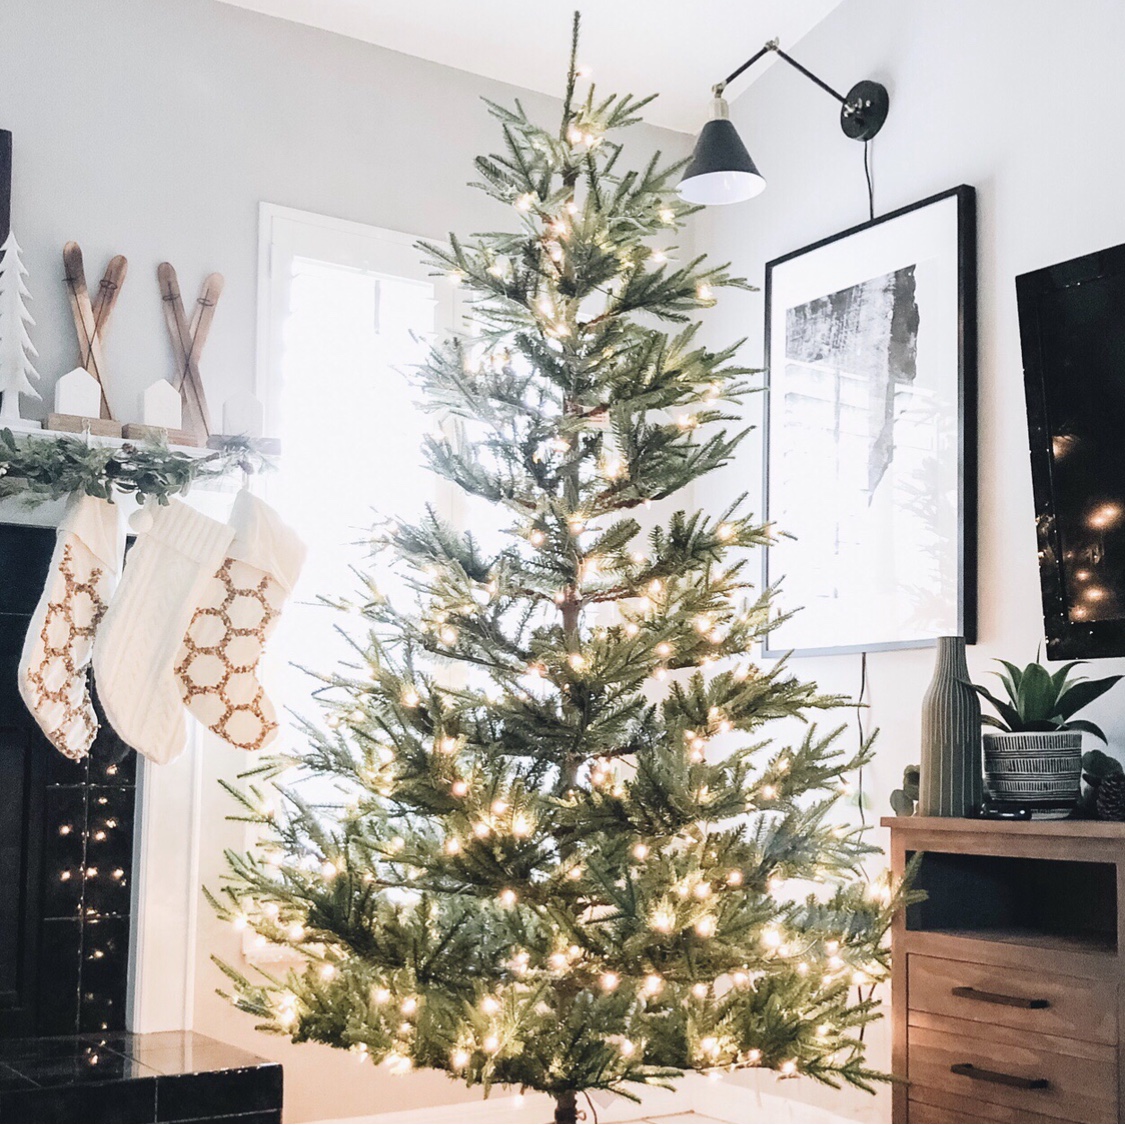 Finding the perfect faux Christmas tree.